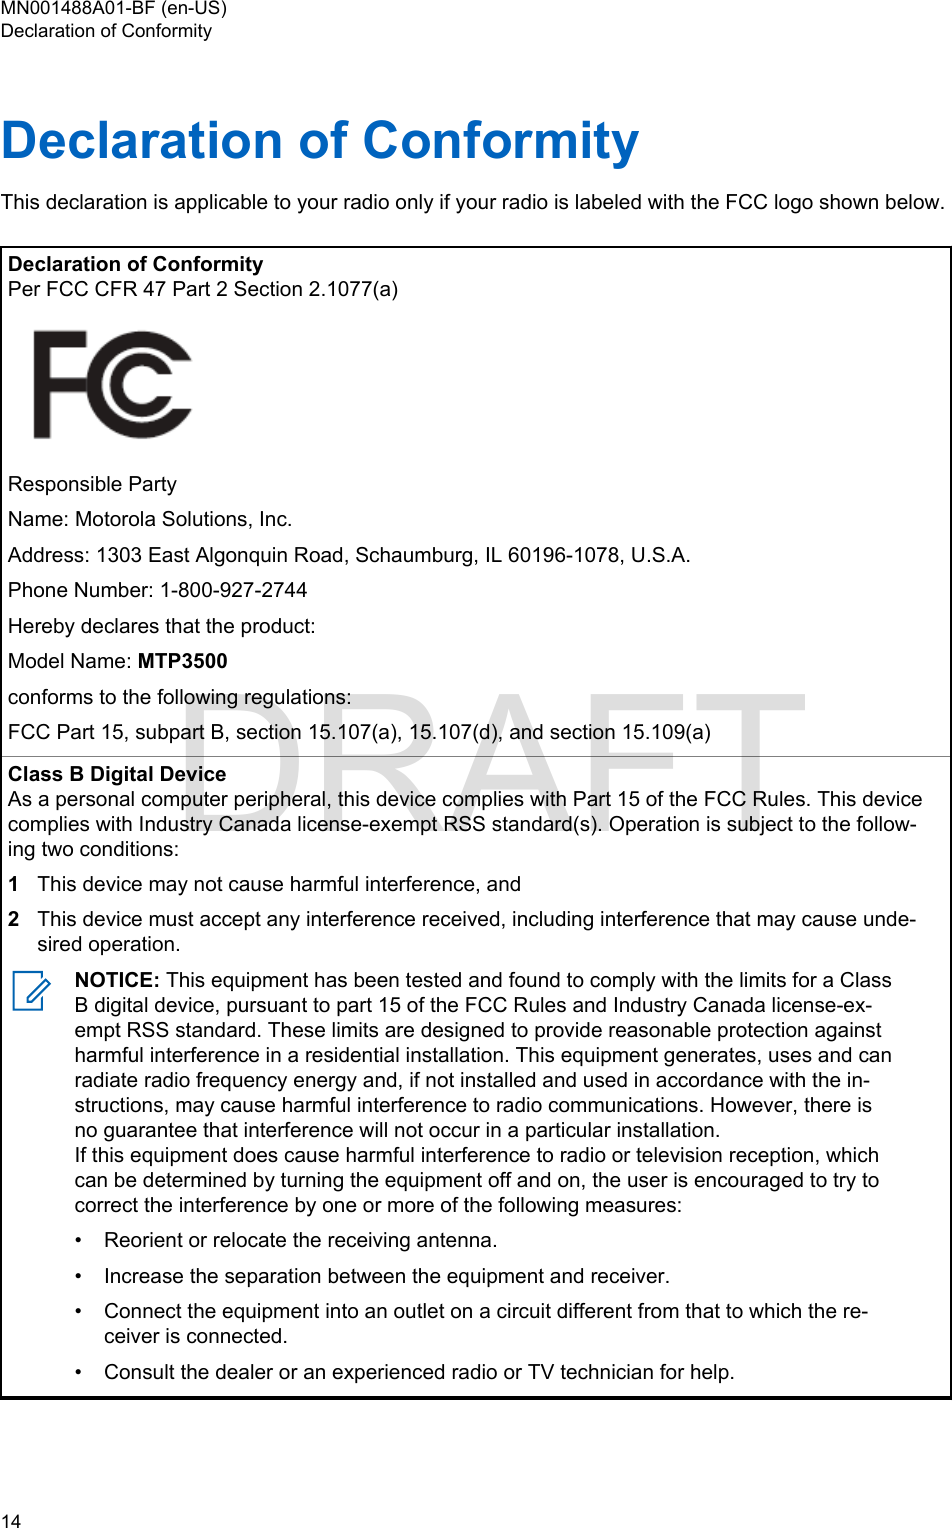 Declaration of ConformityThis declaration is applicable to your radio only if your radio is labeled with the FCC logo shown below.Declaration of ConformityPer FCC CFR 47 Part 2 Section 2.1077(a)Responsible PartyName: Motorola Solutions, Inc.Address: 1303 East Algonquin Road, Schaumburg, IL 60196-1078, U.S.A.Phone Number: 1-800-927-2744Hereby declares that the product:Model Name: MTP3500conforms to the following regulations:FCC Part 15, subpart B, section 15.107(a), 15.107(d), and section 15.109(a)Class B Digital DeviceAs a personal computer peripheral, this device complies with Part 15 of the FCC Rules. This devicecomplies with Industry Canada license-exempt RSS standard(s). Operation is subject to the follow-ing two conditions:1This device may not cause harmful interference, and2This device must accept any interference received, including interference that may cause unde-sired operation.NOTICE: This equipment has been tested and found to comply with the limits for a ClassB digital device, pursuant to part 15 of the FCC Rules and Industry Canada license-ex-empt RSS standard. These limits are designed to provide reasonable protection againstharmful interference in a residential installation. This equipment generates, uses and canradiate radio frequency energy and, if not installed and used in accordance with the in-structions, may cause harmful interference to radio communications. However, there isno guarantee that interference will not occur in a particular installation.If this equipment does cause harmful interference to radio or television reception, whichcan be determined by turning the equipment off and on, the user is encouraged to try tocorrect the interference by one or more of the following measures:• Reorient or relocate the receiving antenna.• Increase the separation between the equipment and receiver.• Connect the equipment into an outlet on a circuit different from that to which the re-ceiver is connected.• Consult the dealer or an experienced radio or TV technician for help.MN001488A01-BF (en-US)Declaration of Conformity14  DRAFT